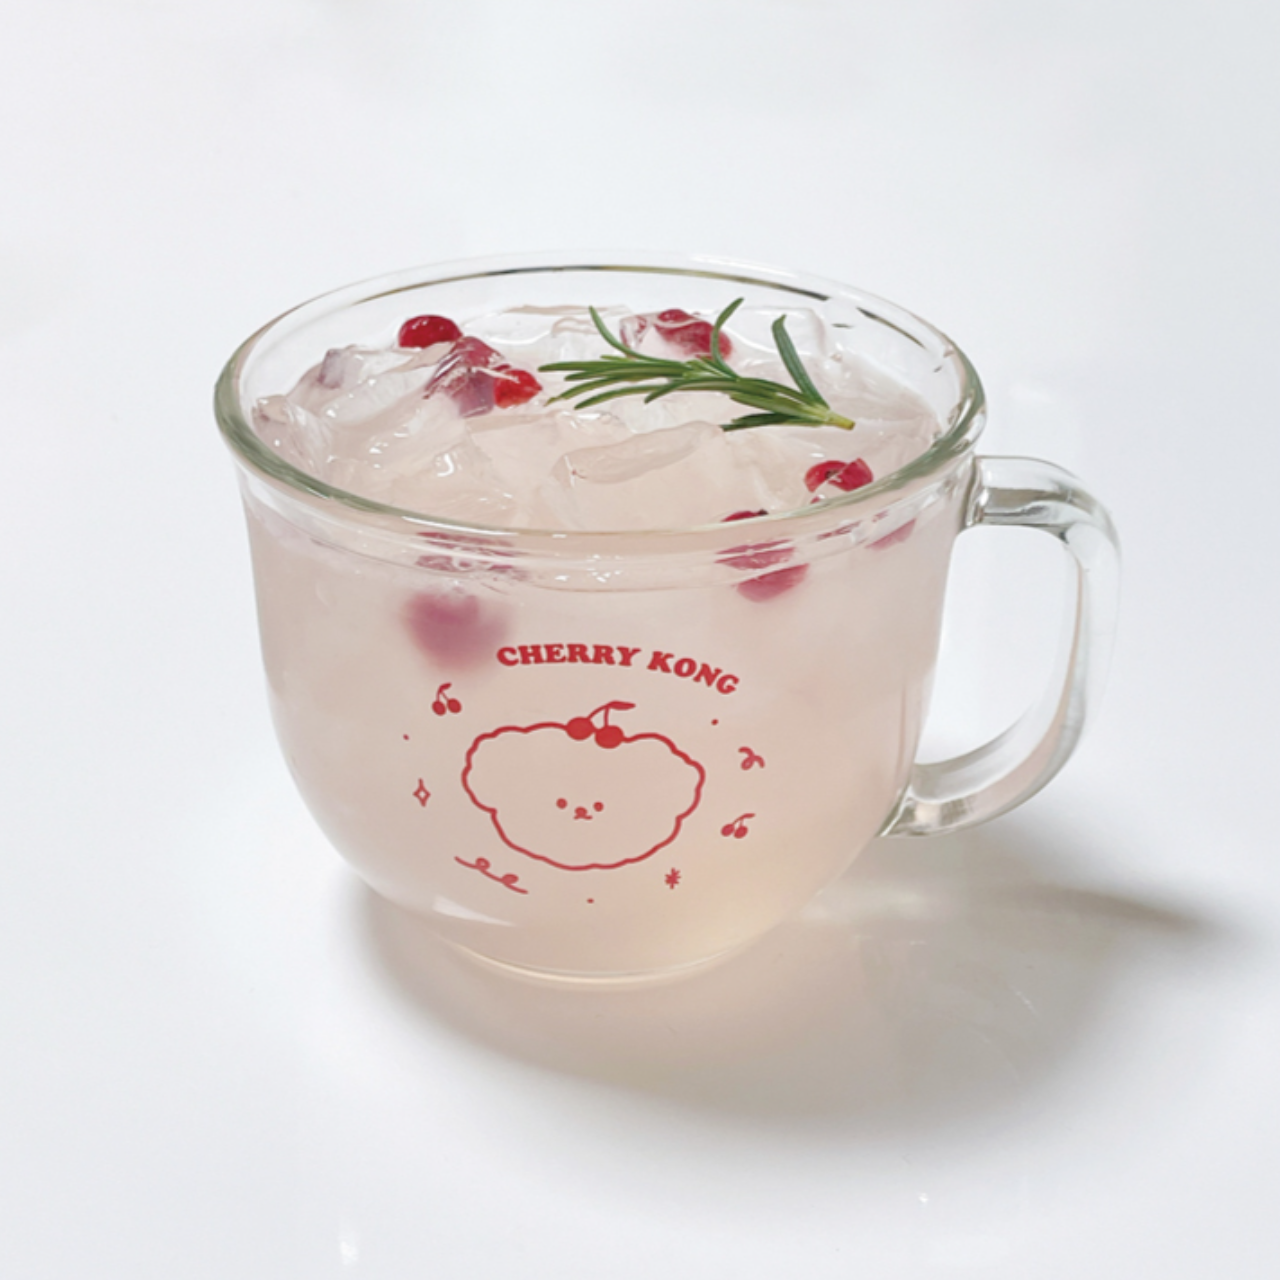 [DEEPING CASE] Cherry Kong Cereal Cup 470ml